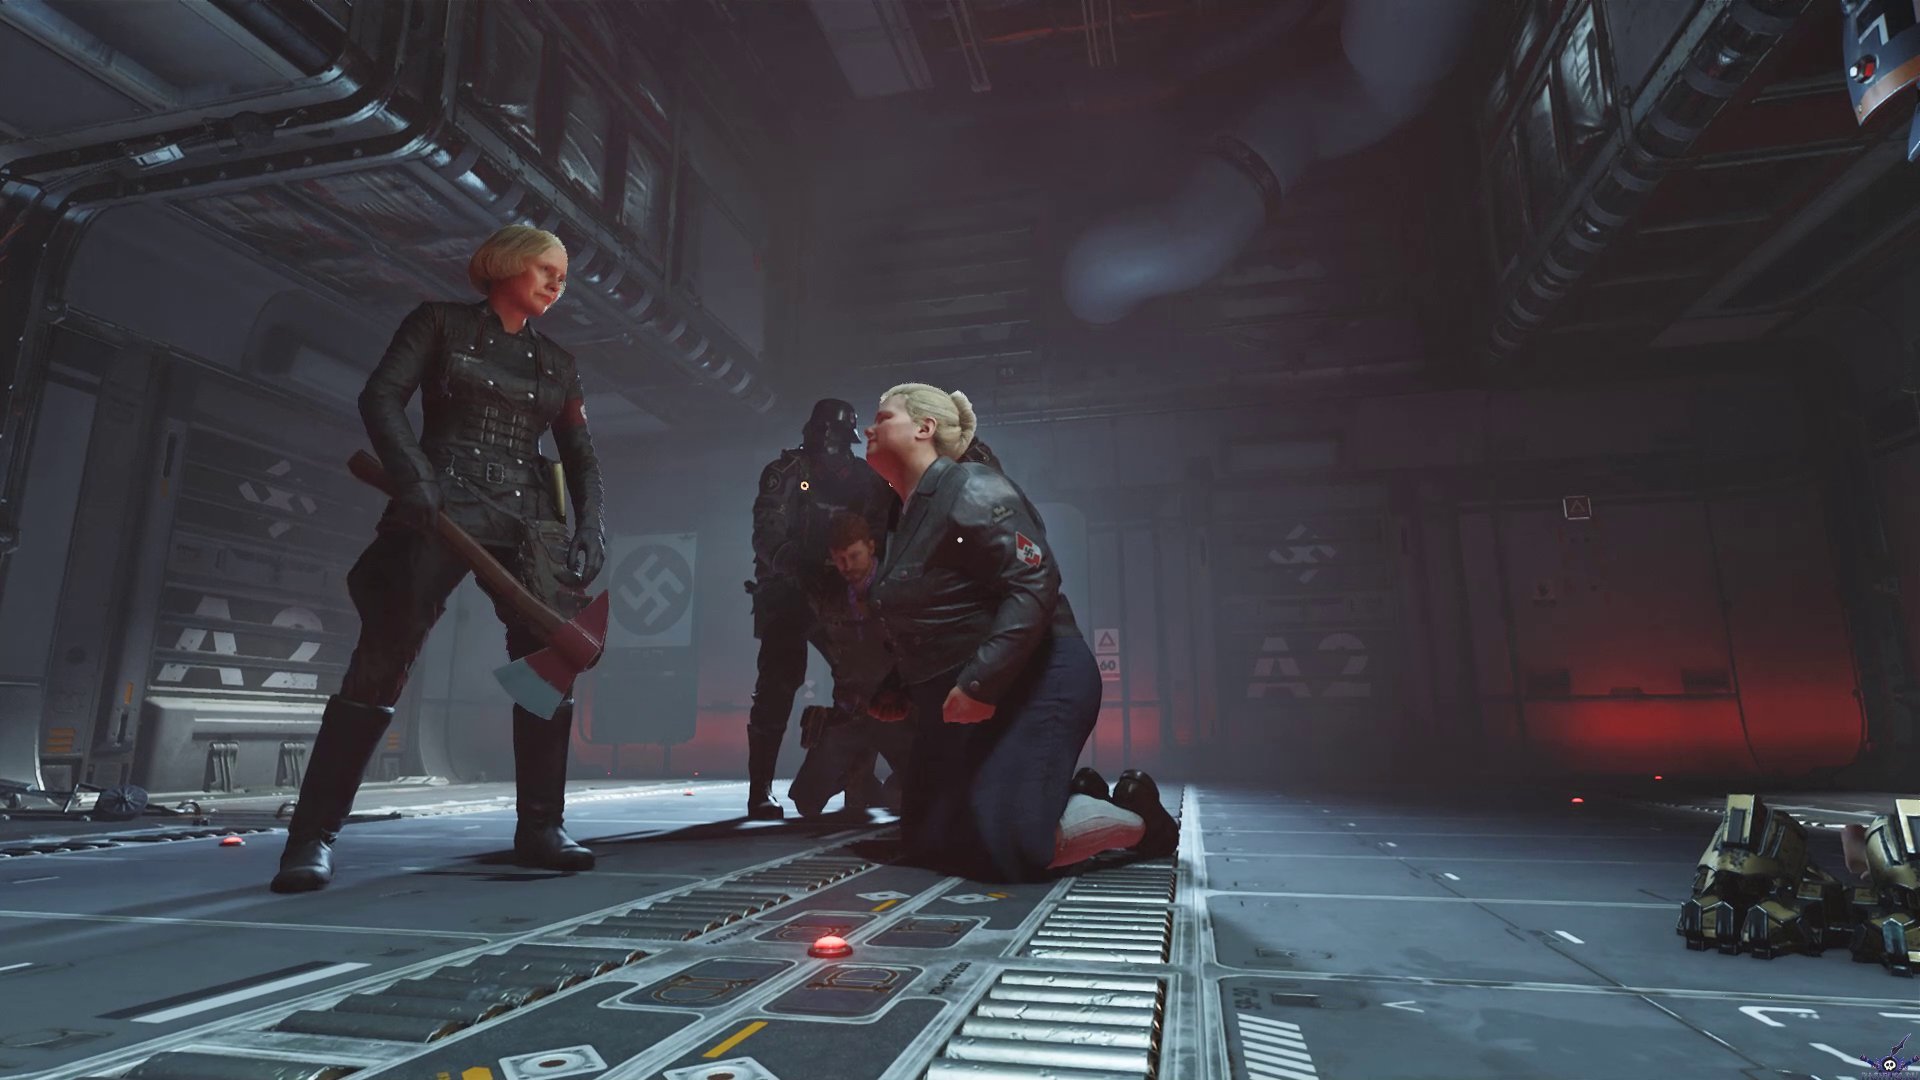 Wolfenstein ii the new colossus could. Суперчудила Wolfenstein 2. Wolfenstein II: the New Colossus. Вольфенштайн the New Colossus.